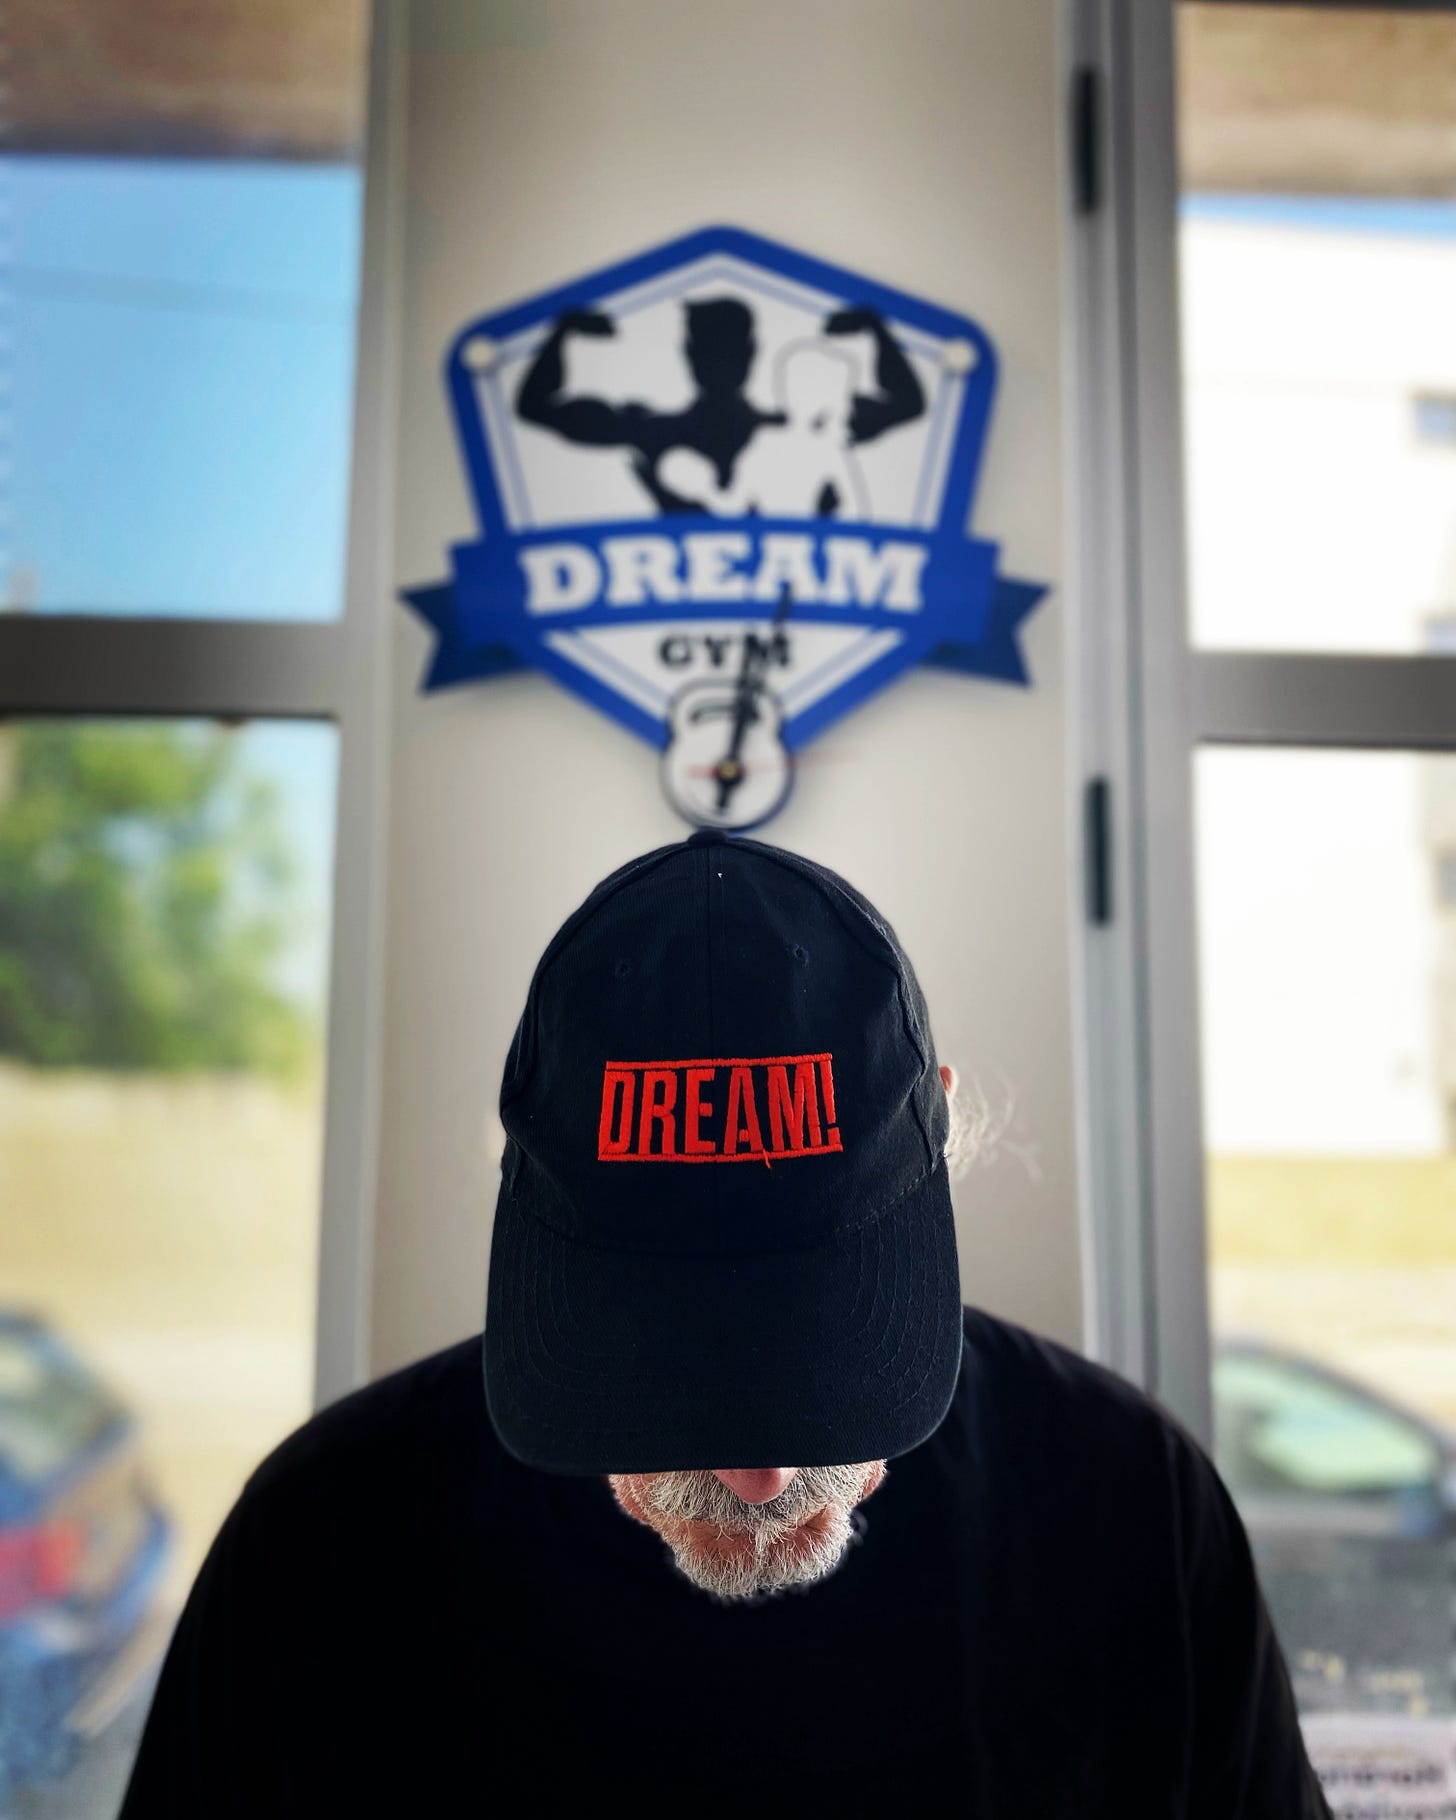 Simon Campbell pictured wearing a Starlite & Campbell 'Dream' cap at the Dream Gym, Samora Correia, Portugal.